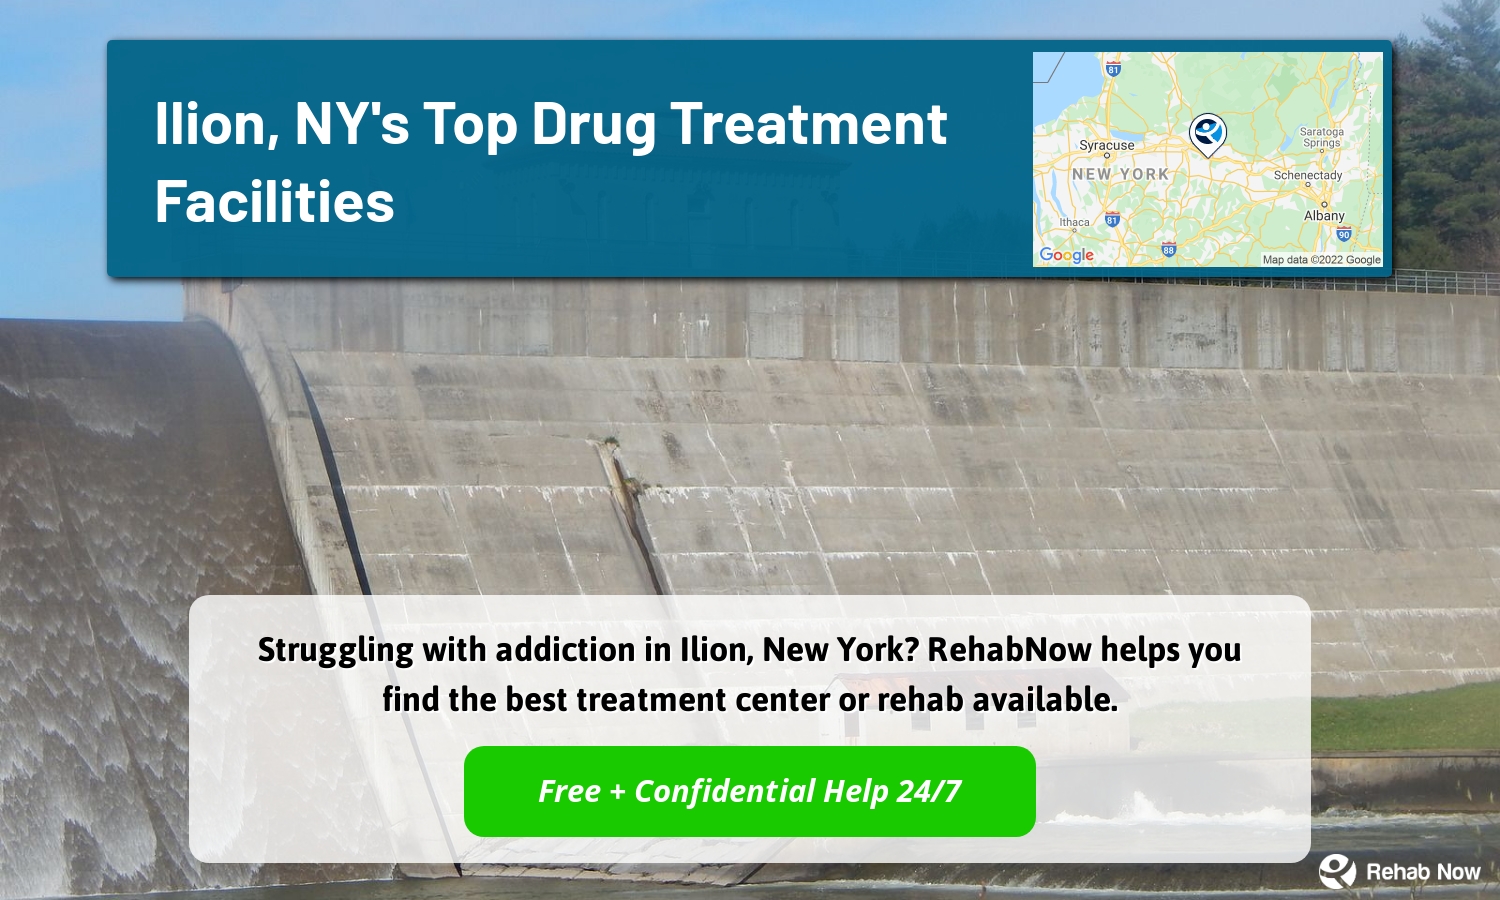 Struggling with addiction in Ilion, New York? RehabNow helps you find the best treatment center or rehab available.